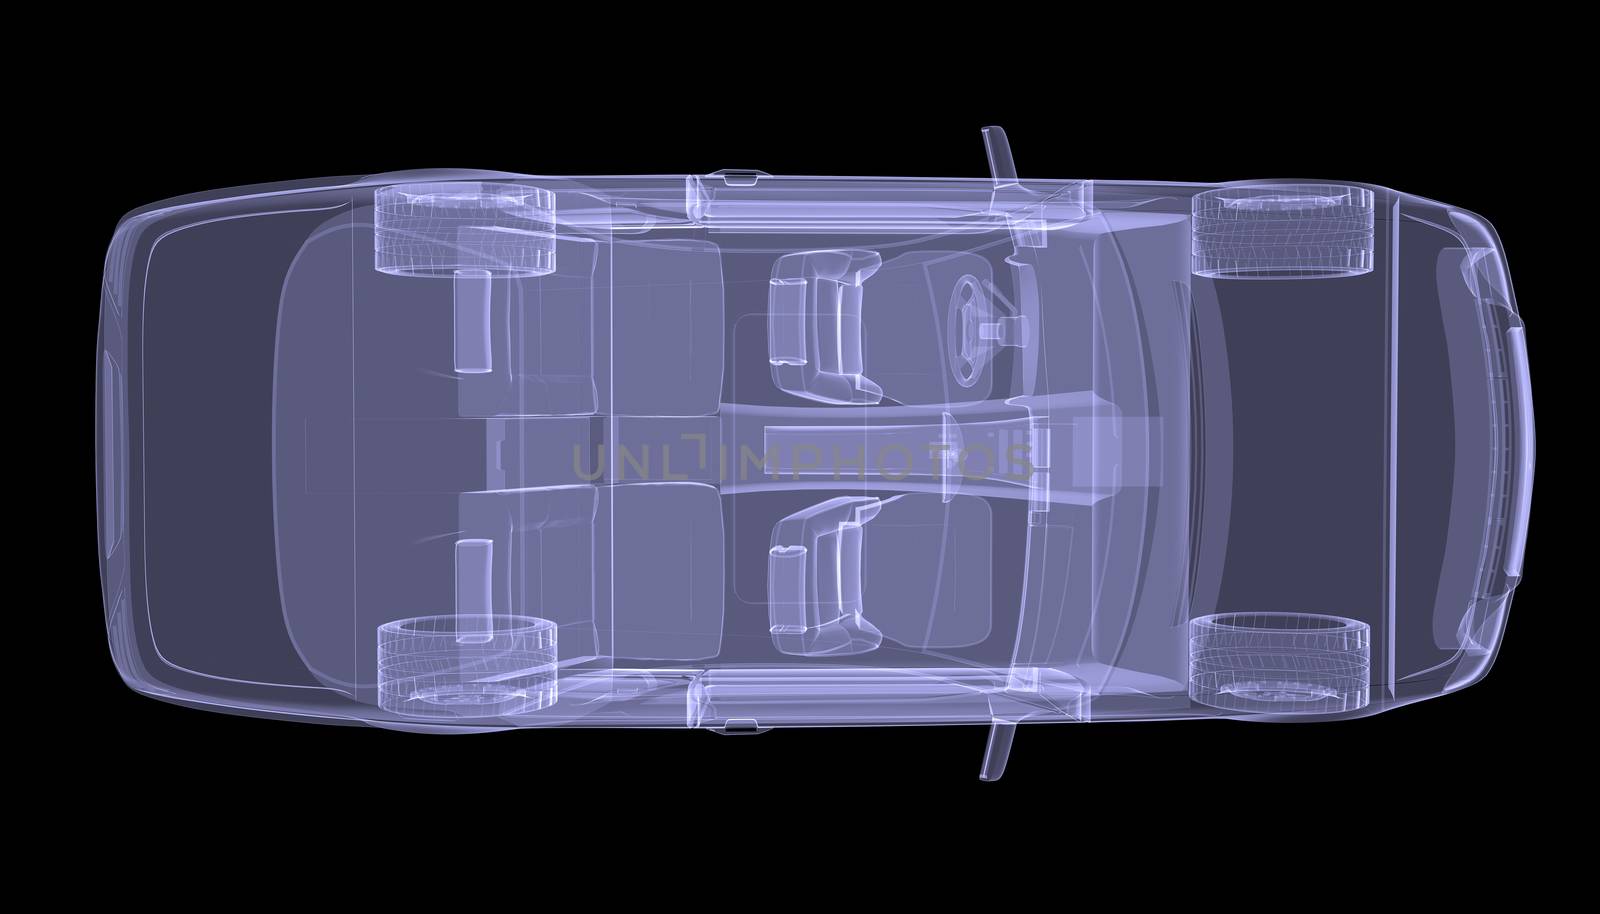 X-ray concept car. Top view by cherezoff